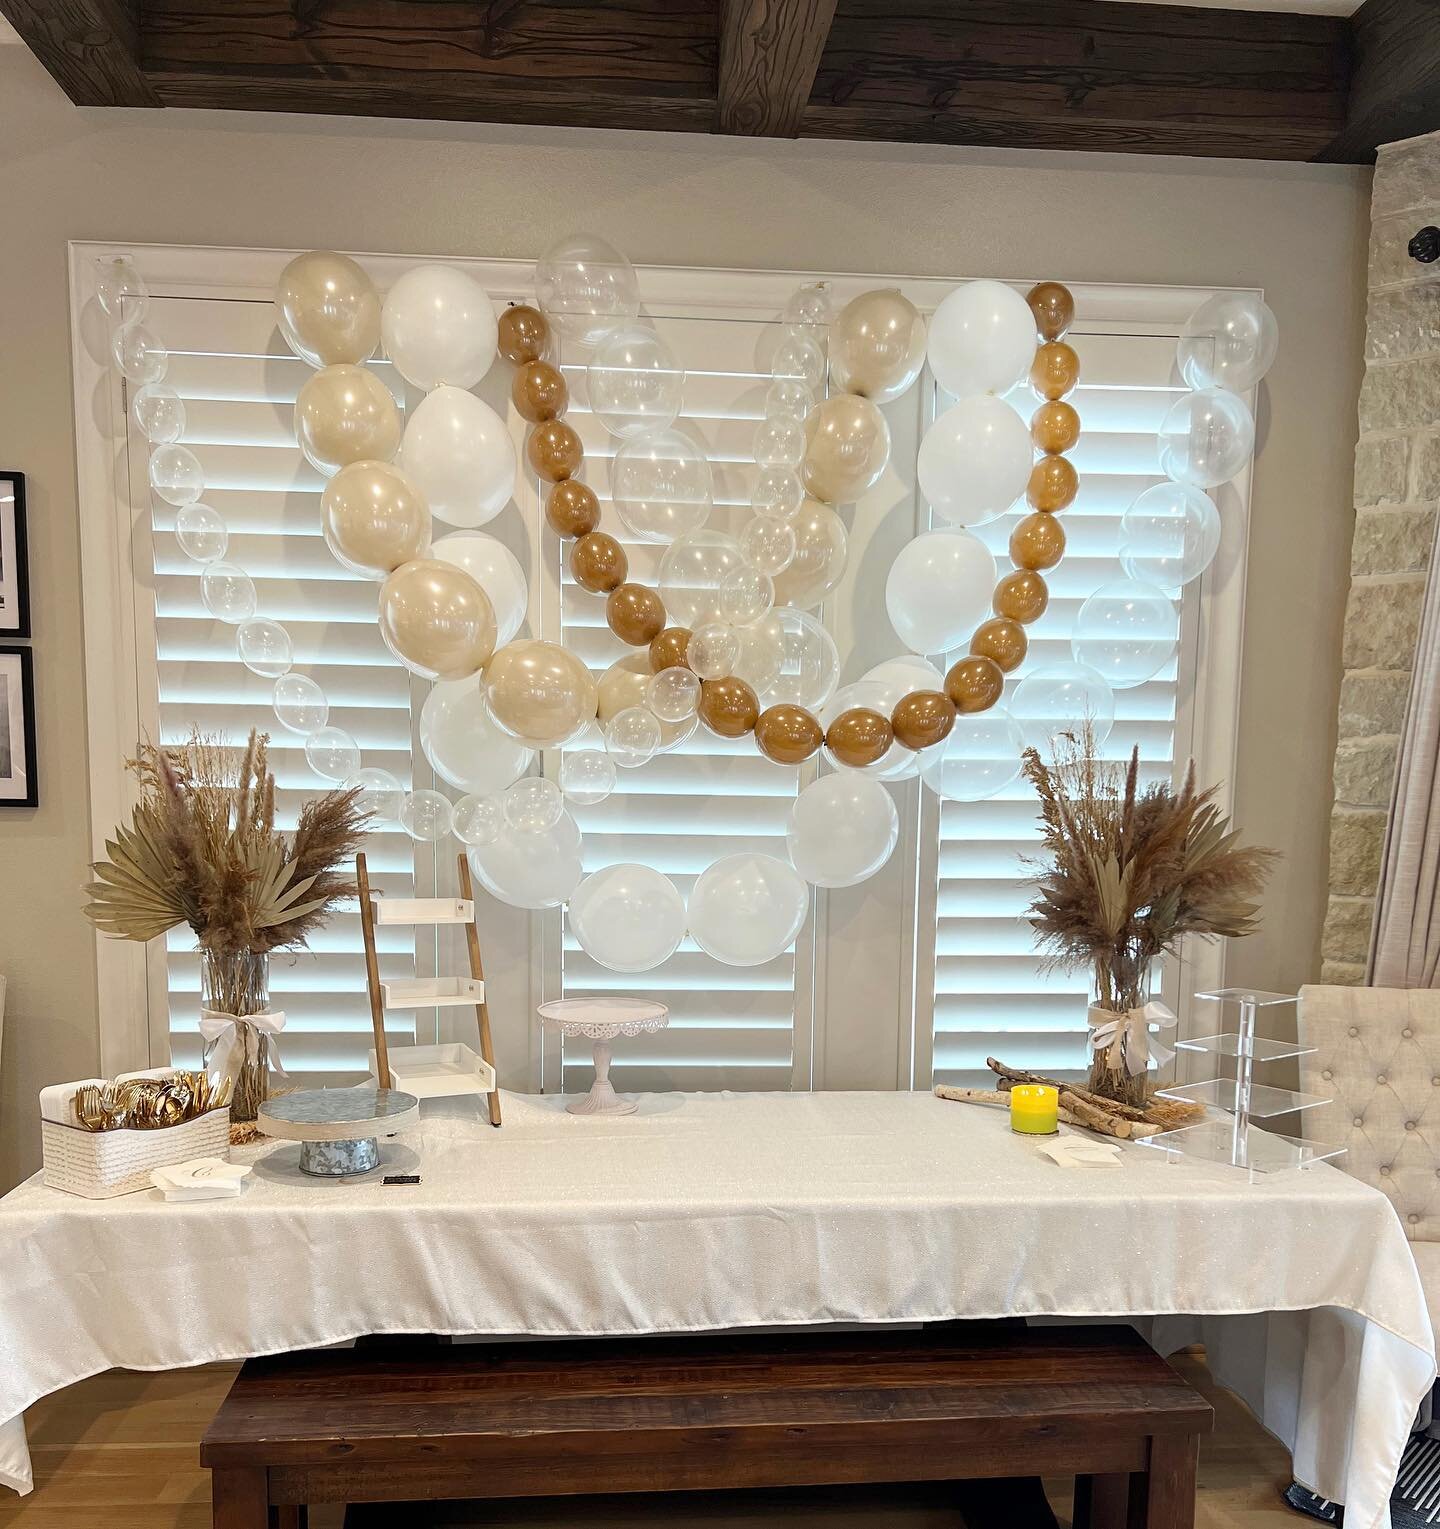 🥂 Cheers to the cutest balloon drapery✨